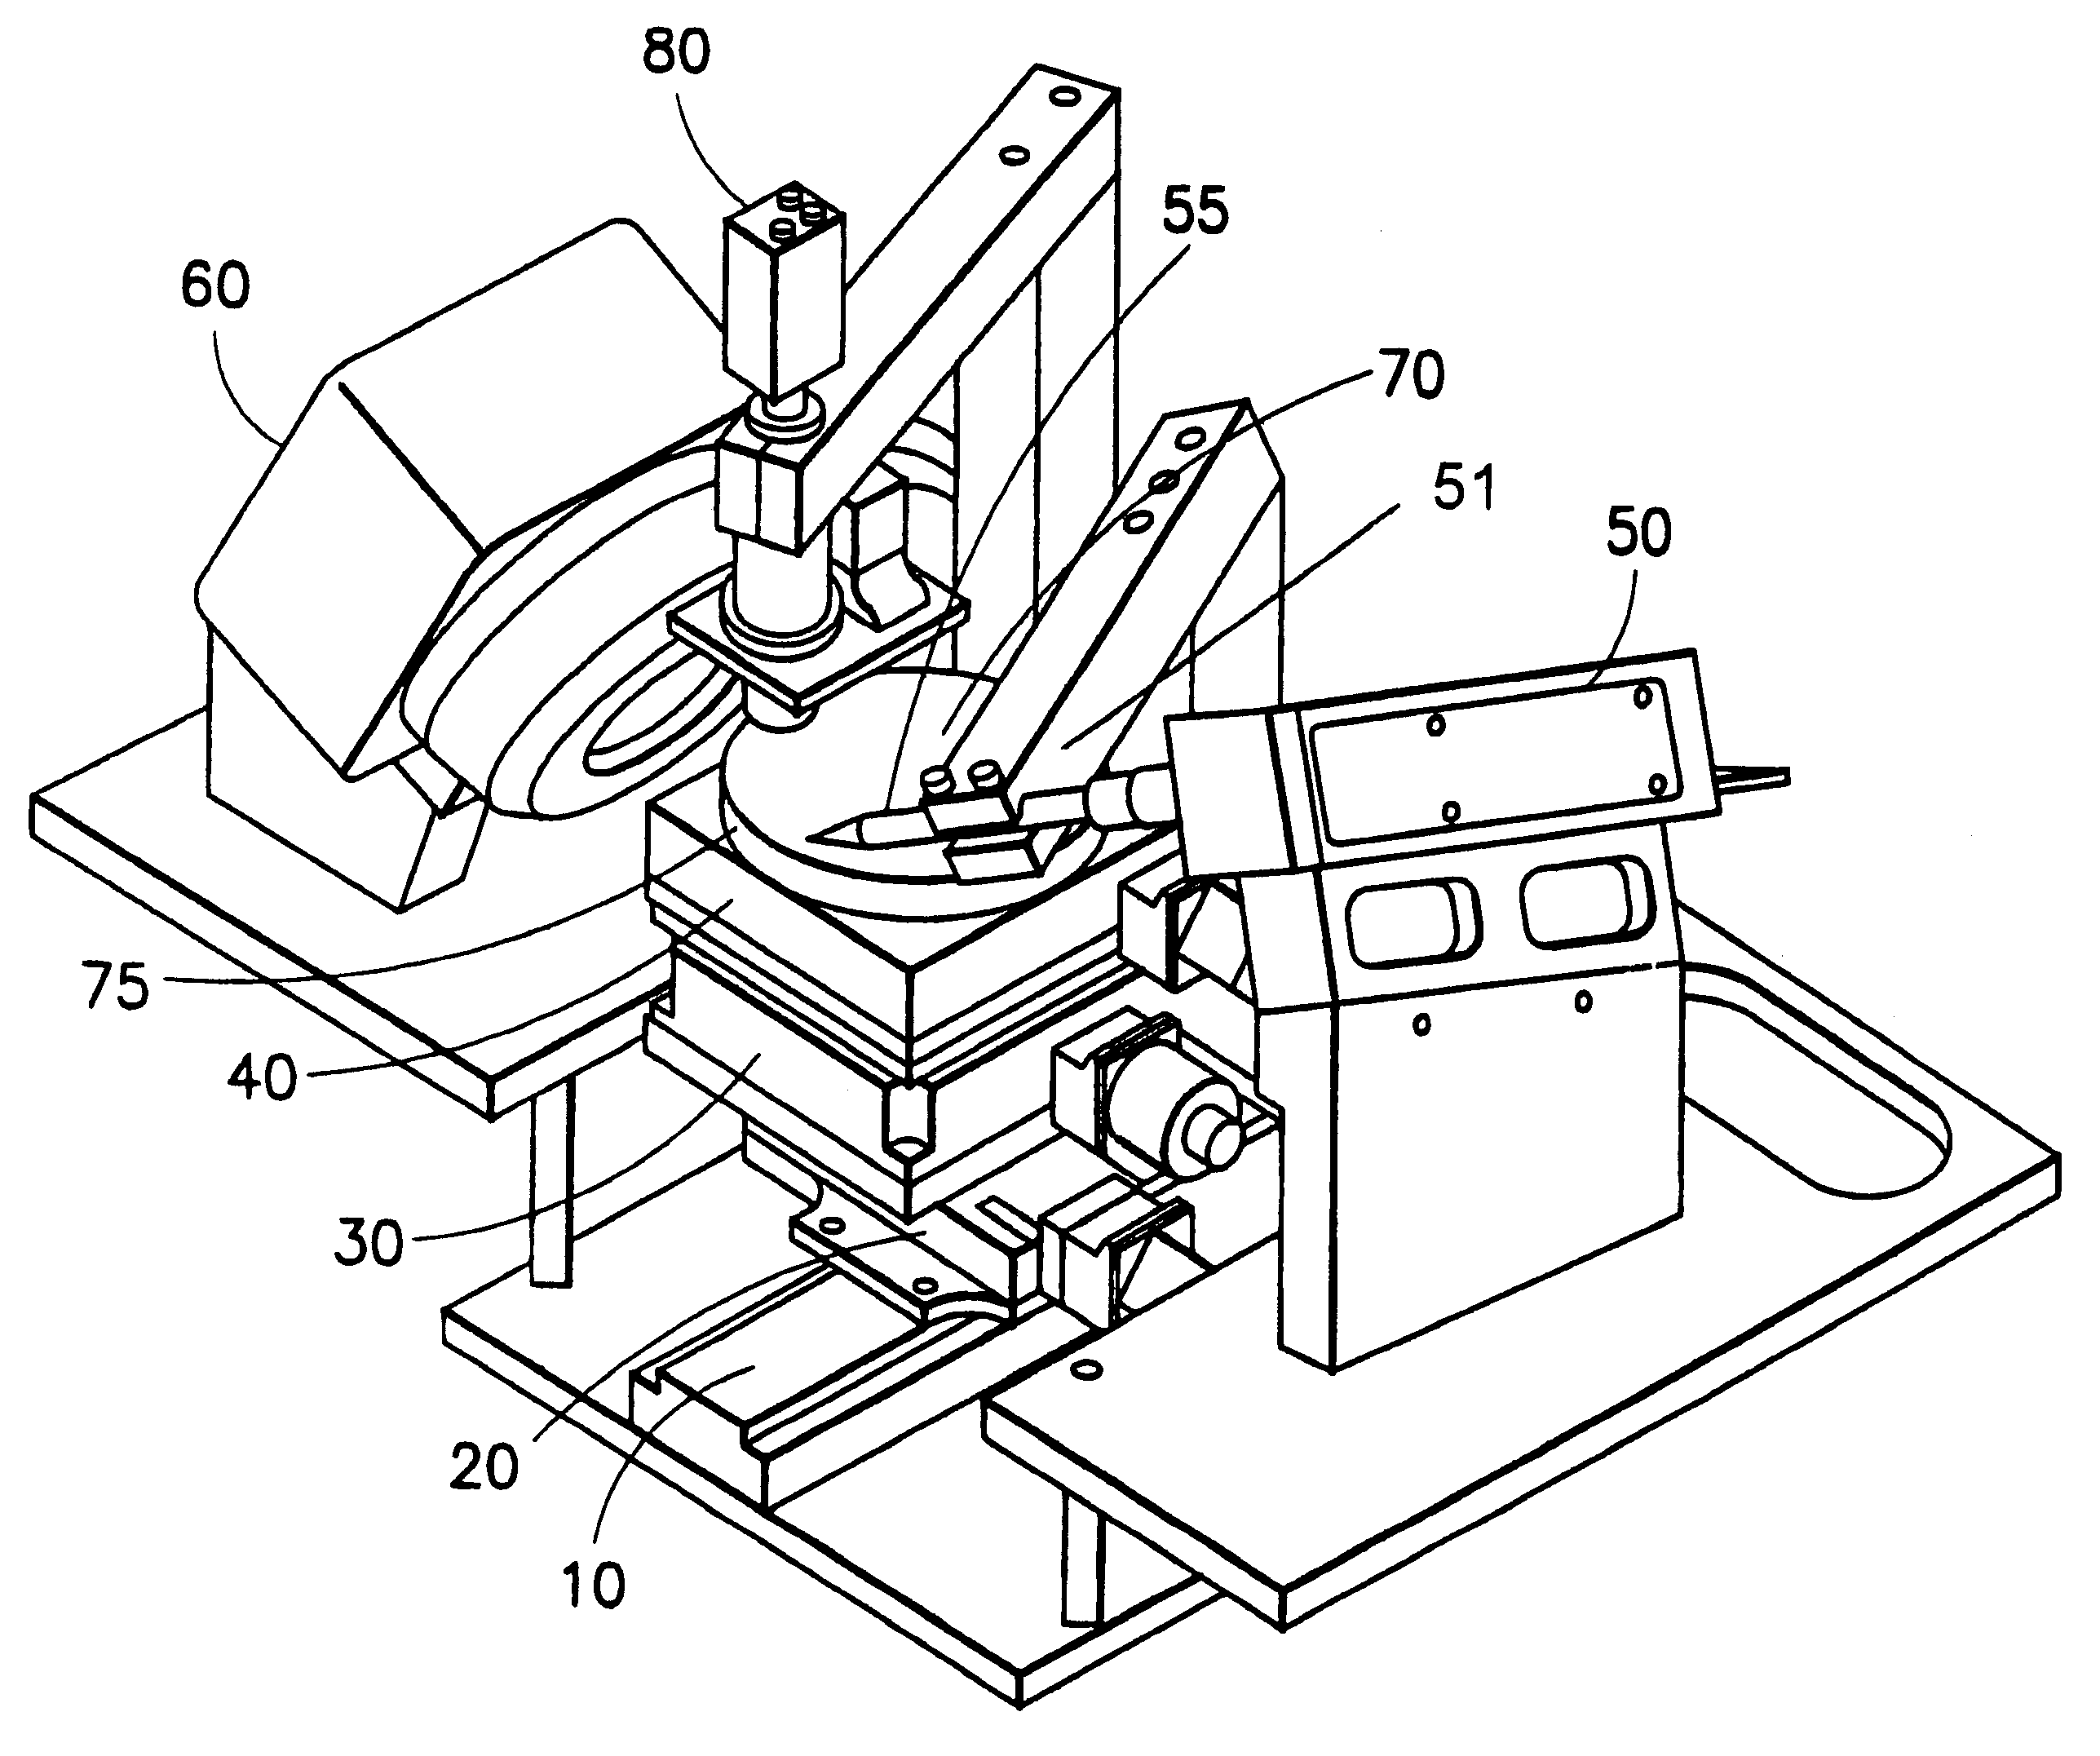 Apparatus and method for texture analysis on semiconductor wafers